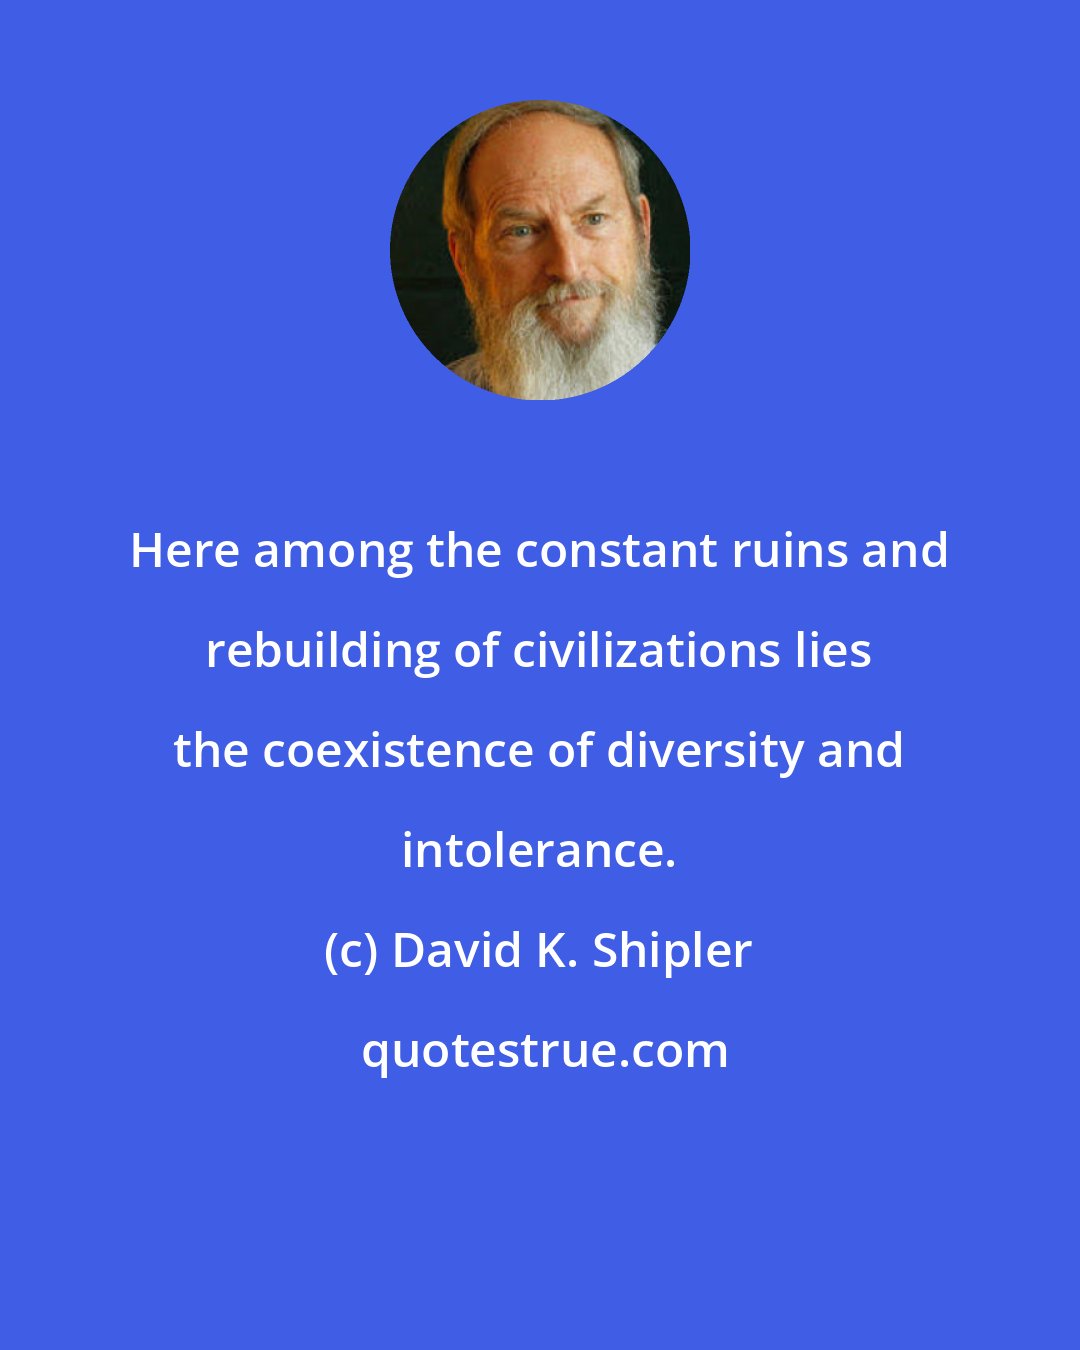 David K. Shipler: Here among the constant ruins and rebuilding of civilizations lies the coexistence of diversity and intolerance.